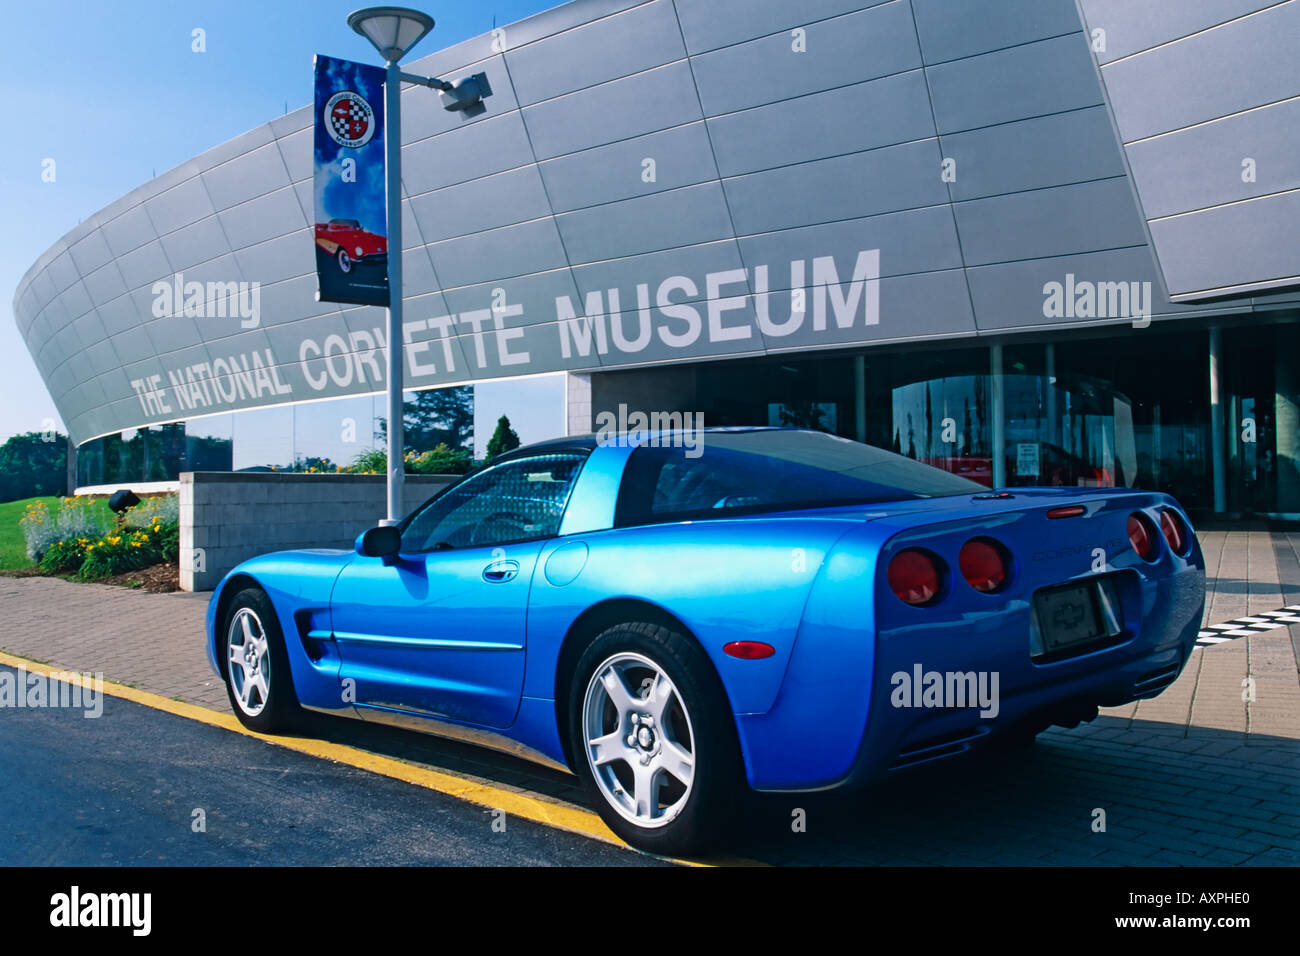 The National Corvette Museum in Bowling Green Kentucky United States Stock Photo